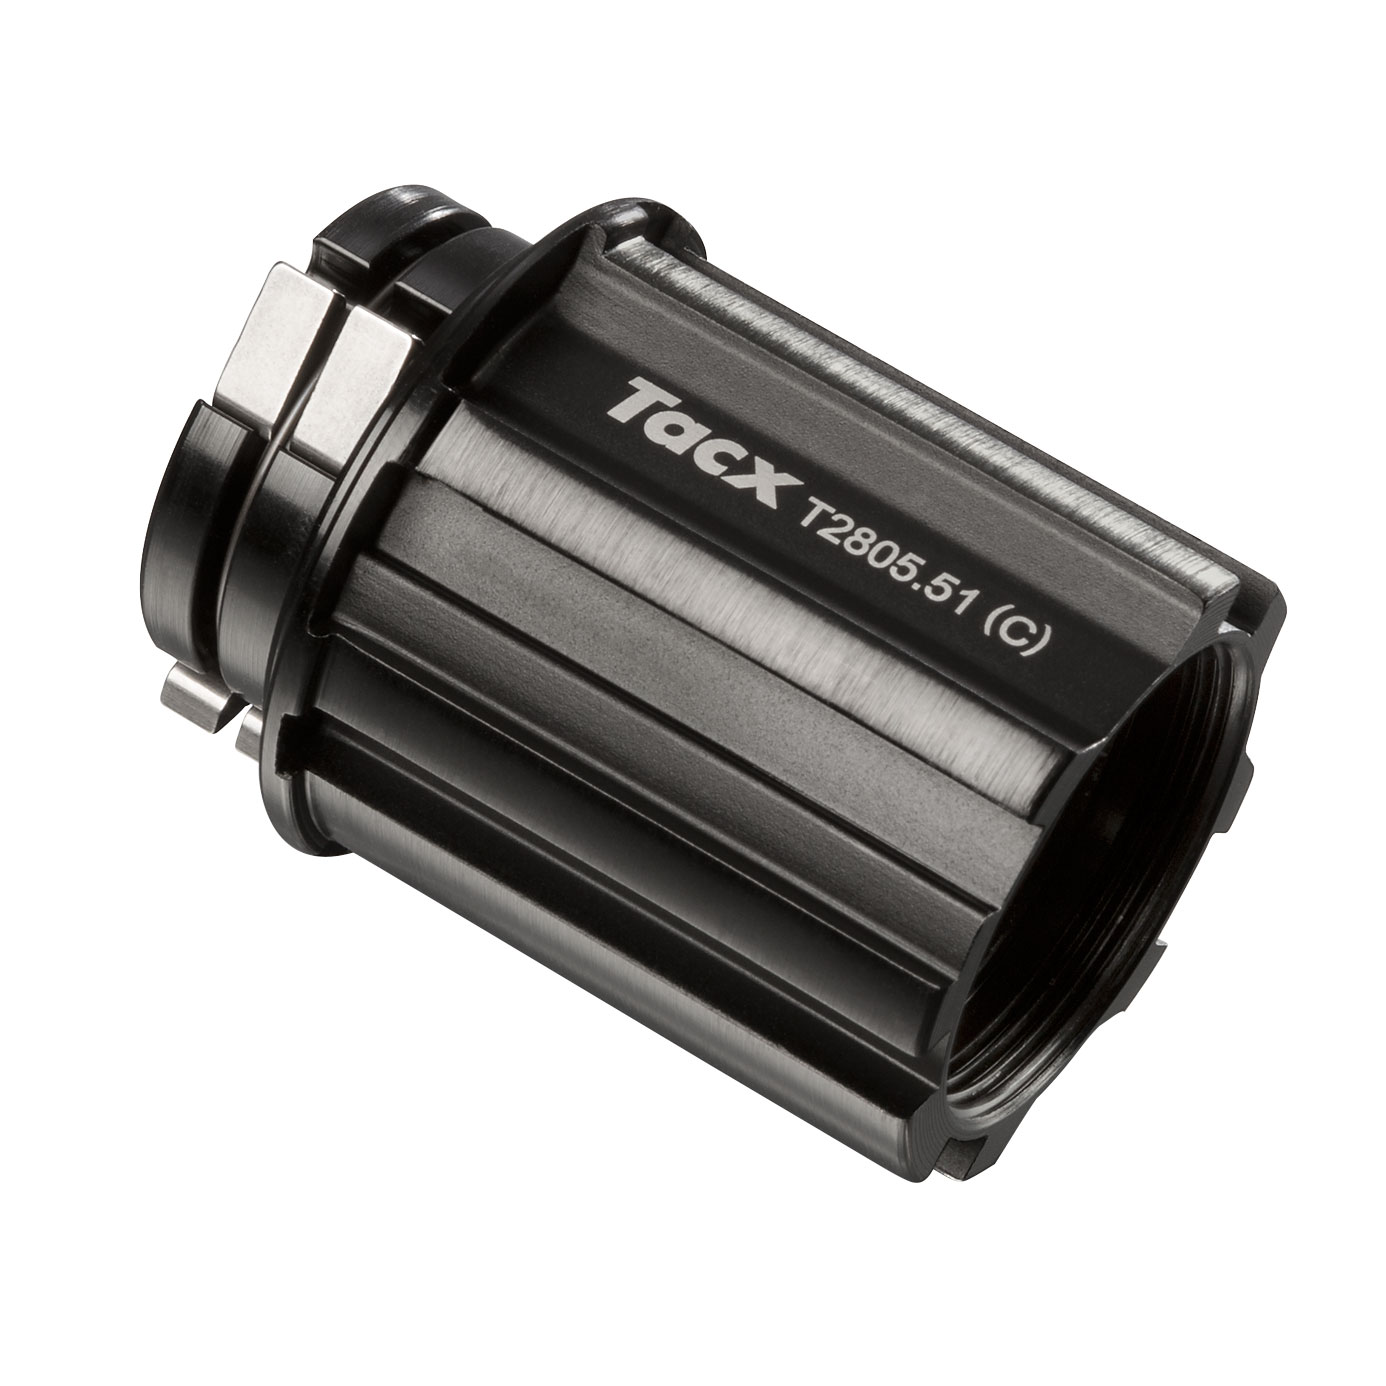 Picture of Garmin Tacx T2805.51 Campagnolo Freewheel for Flux - black